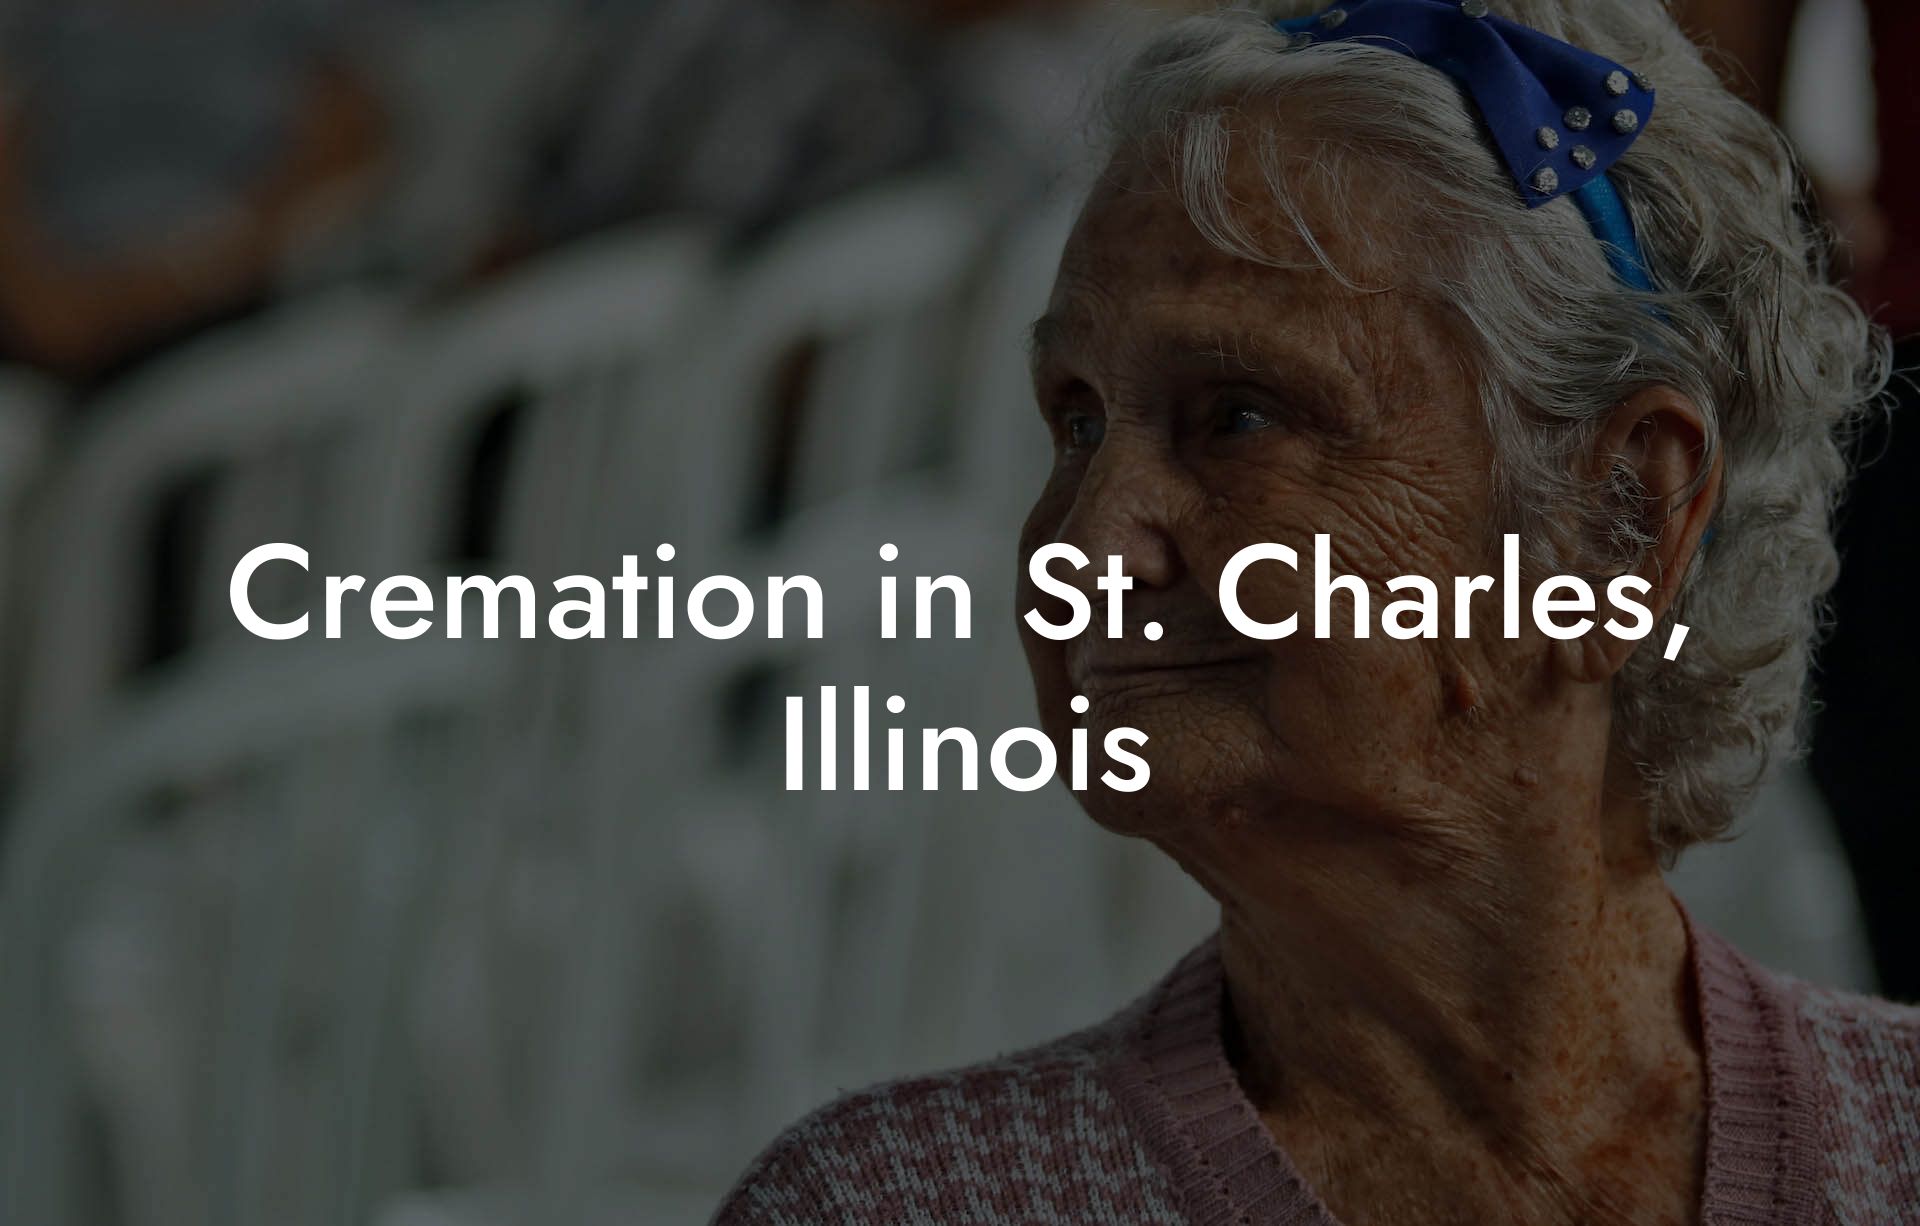 Cremation in St. Charles, Illinois